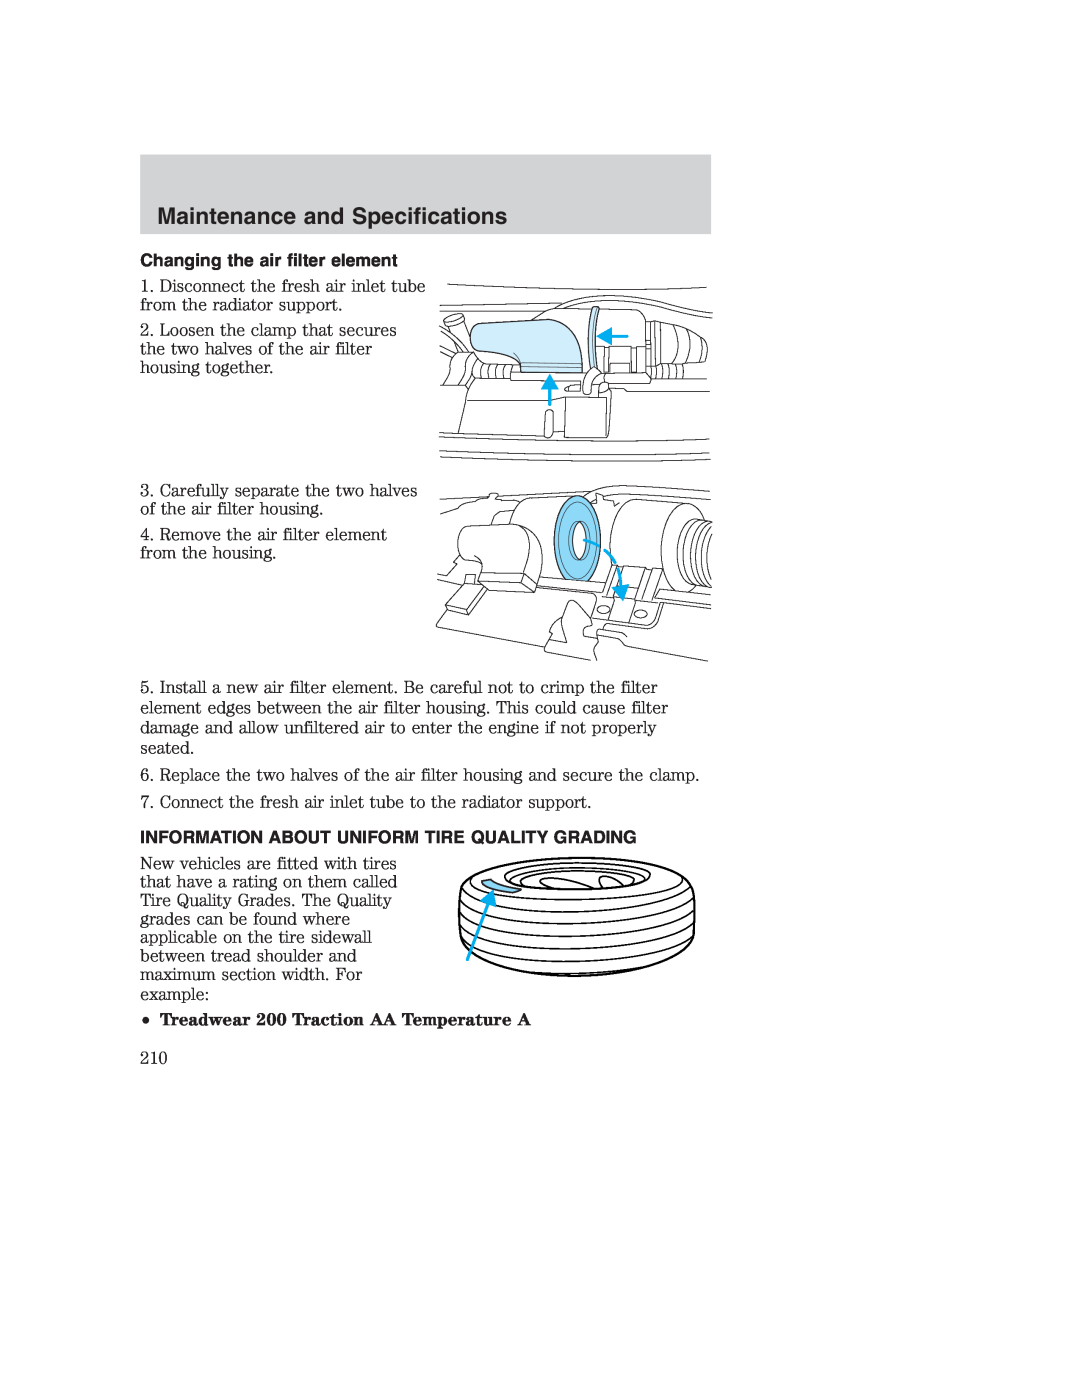 Ford AM/FM stereo manual Changing the air filter element, Information About Uniform Tire Quality Grading 